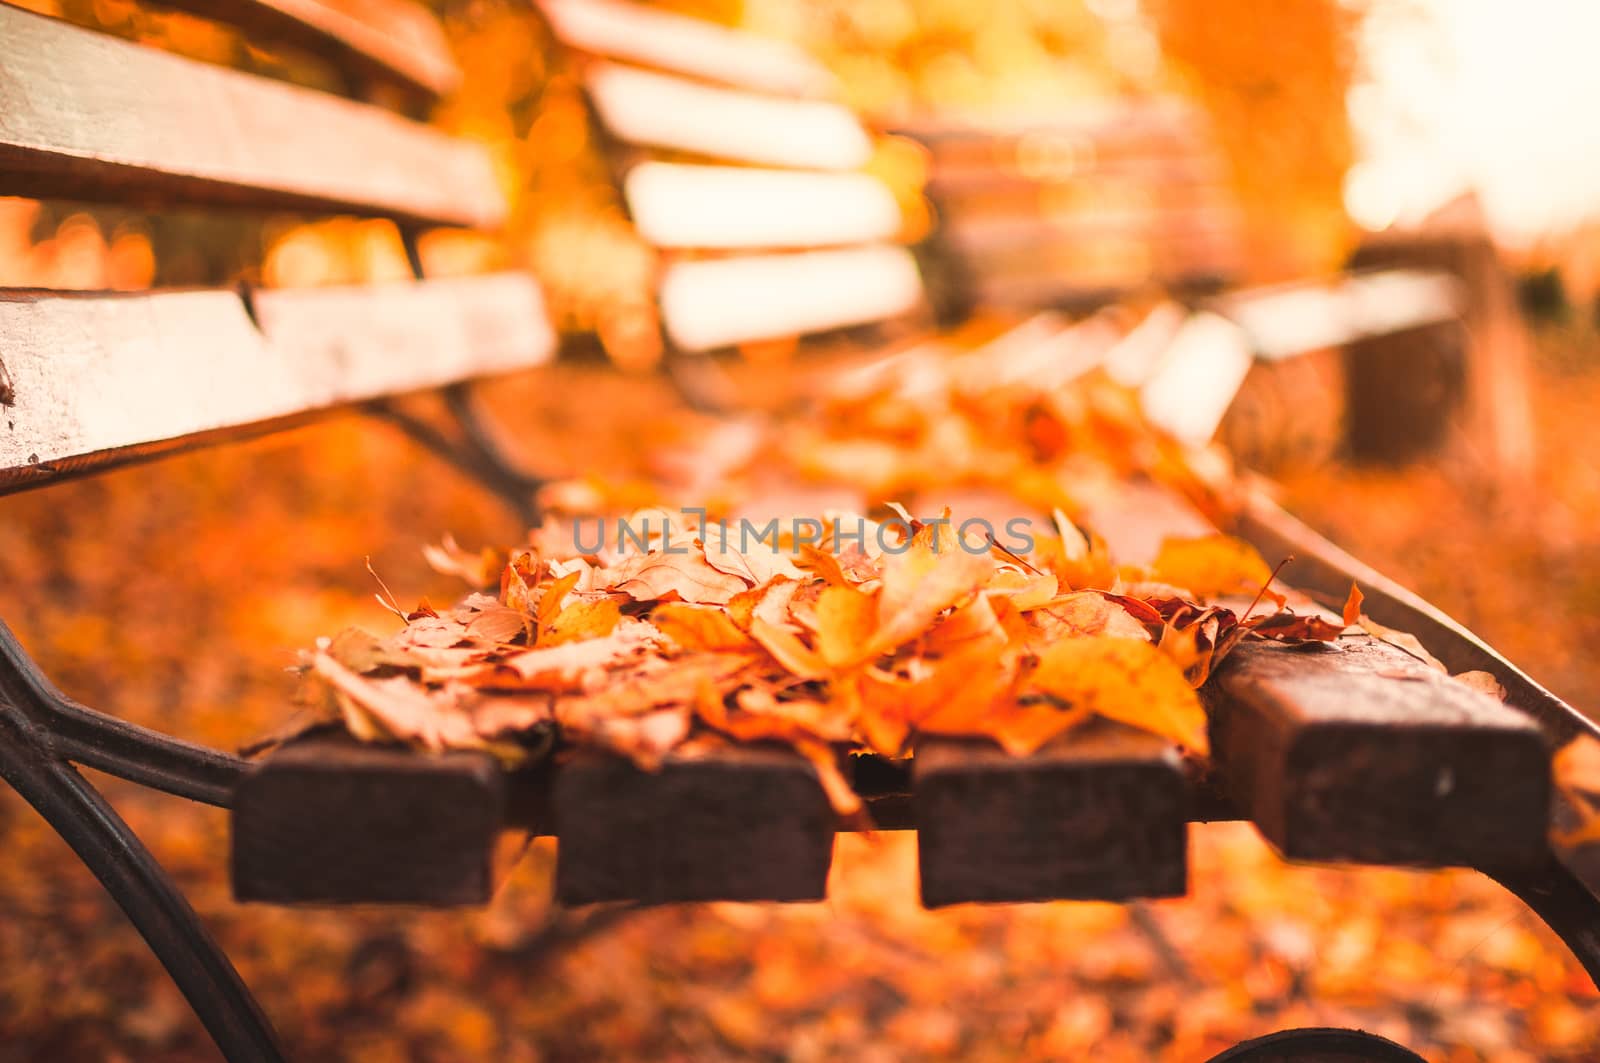 empty bench in the autumn park is strewn with red and yellow dry leaves. Golden autumn close-up concept.relaxing place for reflection and contemplation.